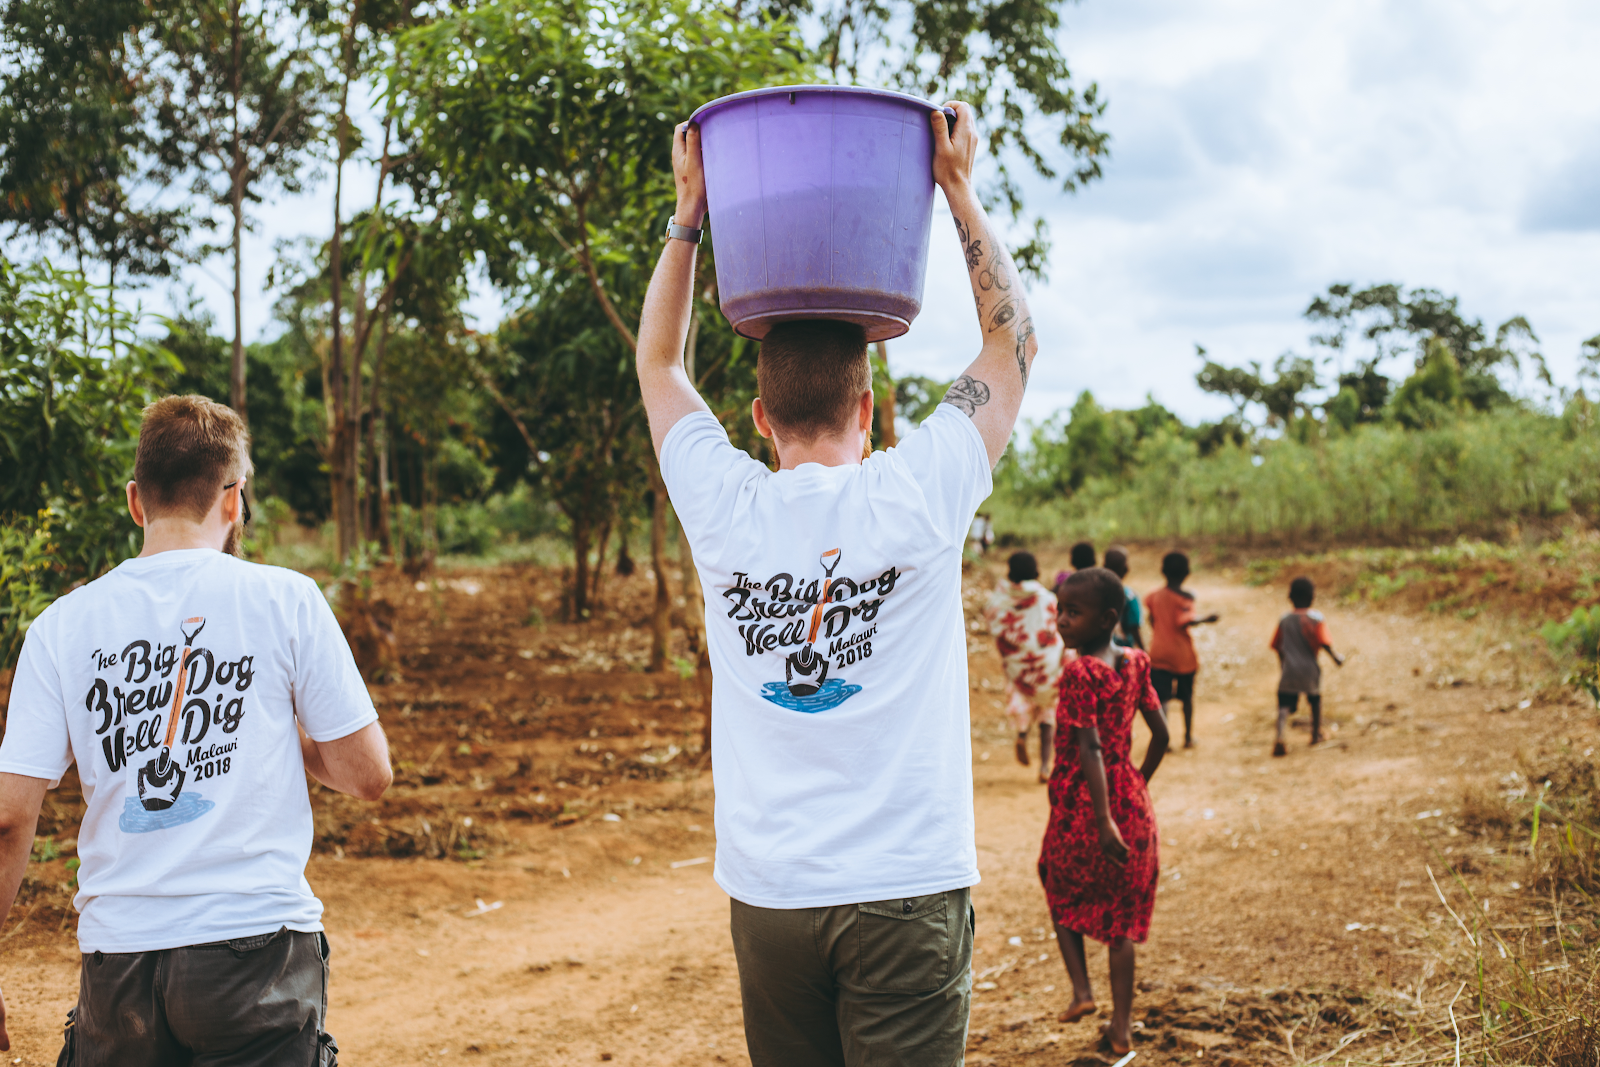 Brewgooder and Brewdog working in tandem to bring clean water to Malawian communities 